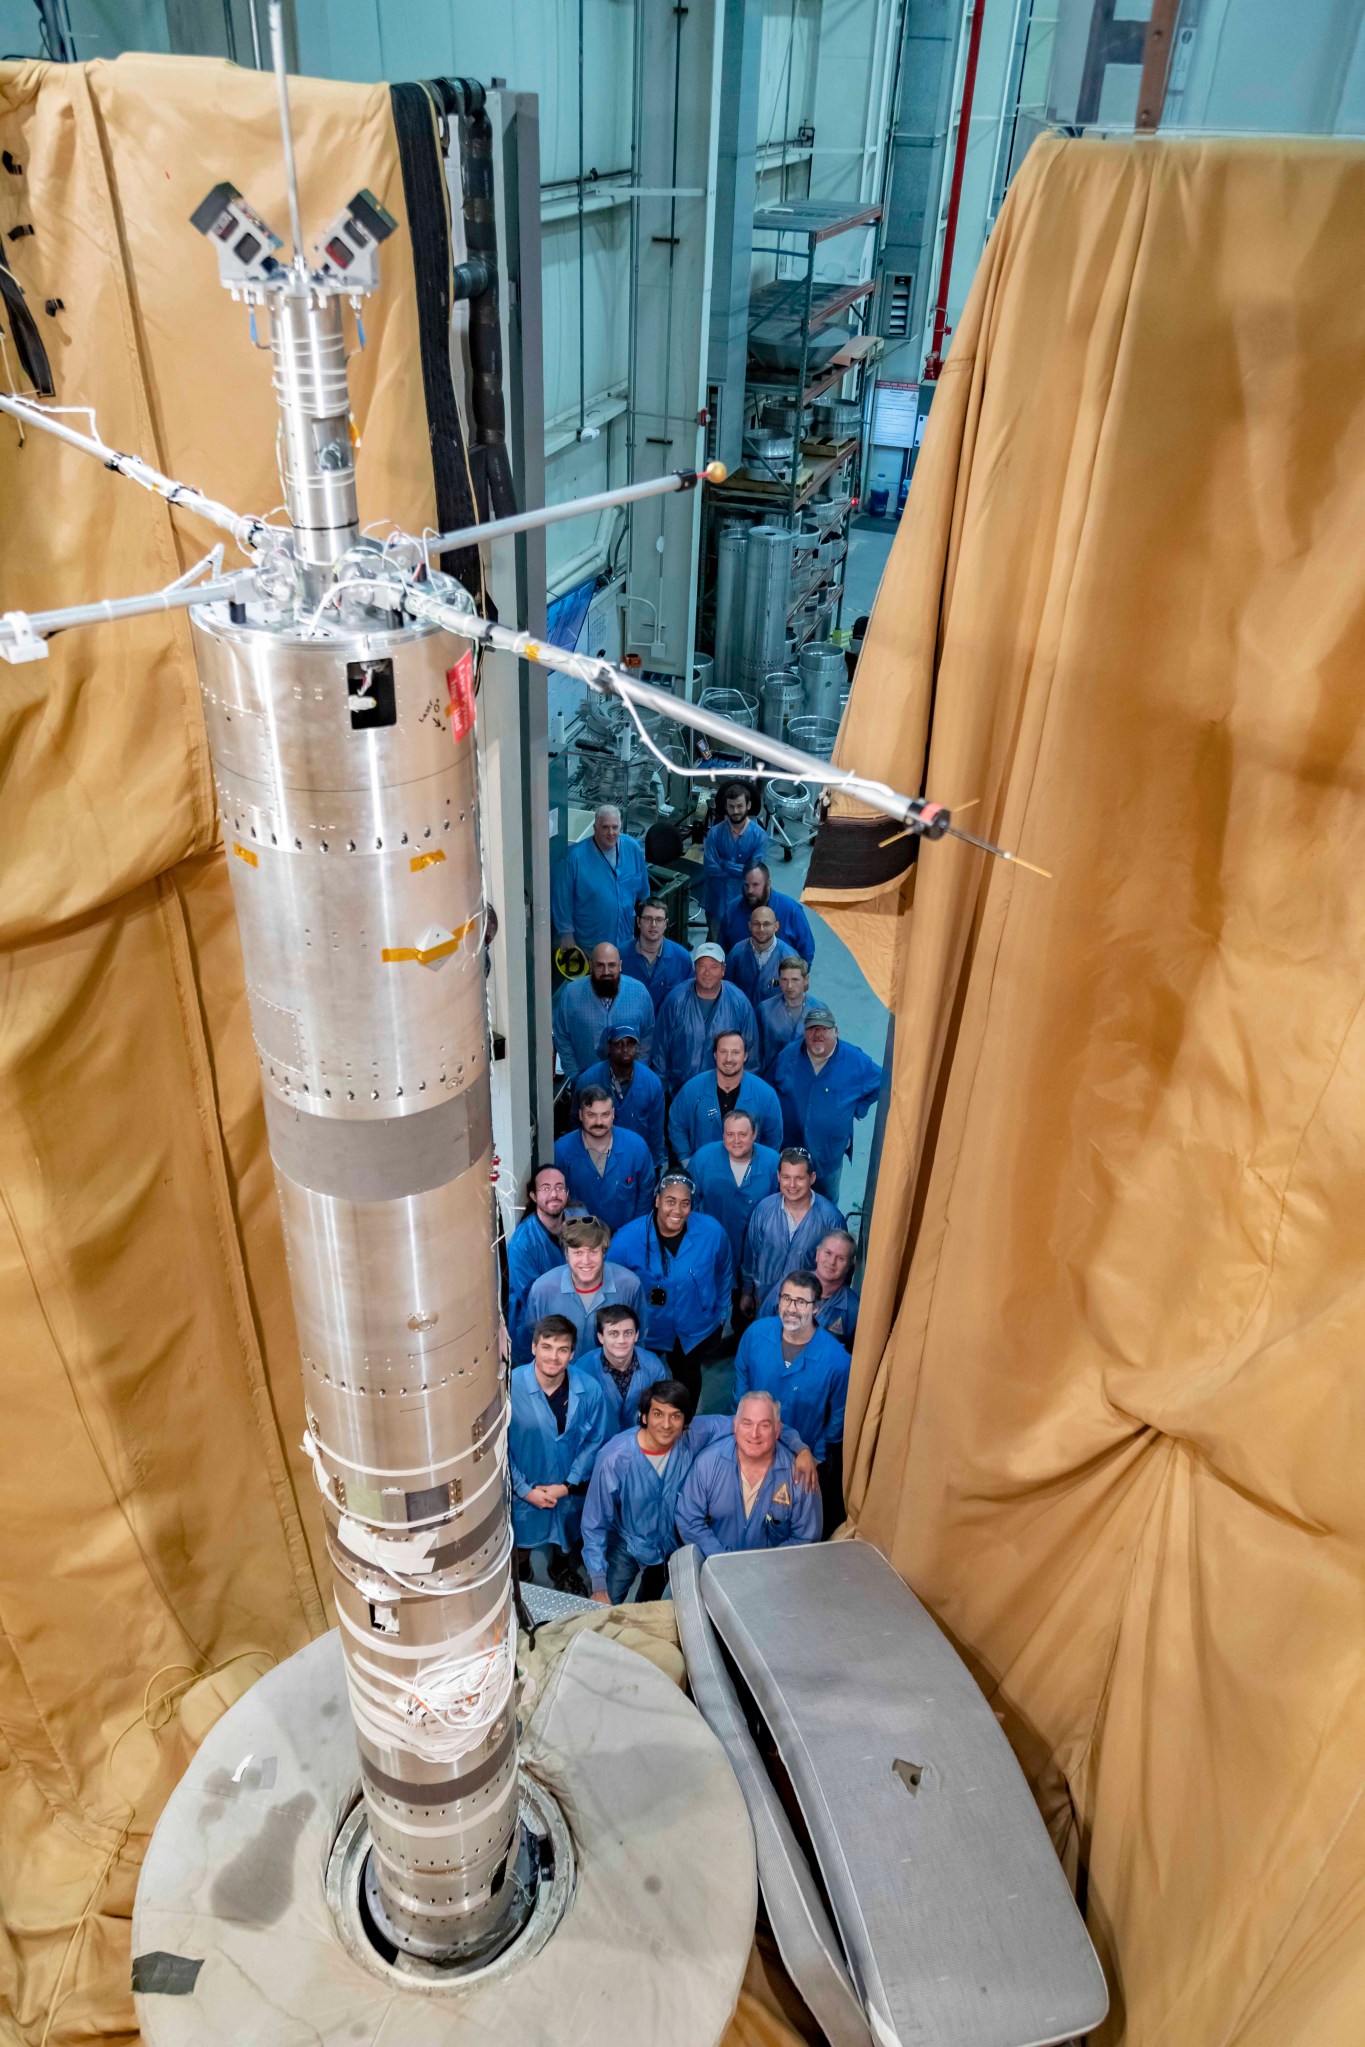 In the foreground, a section of a rocket payload stands vertical on a platform, surrounded by brown cloth. Below the rocket in the background is a line of people in blue jackets looking up at the camera for a group photo.